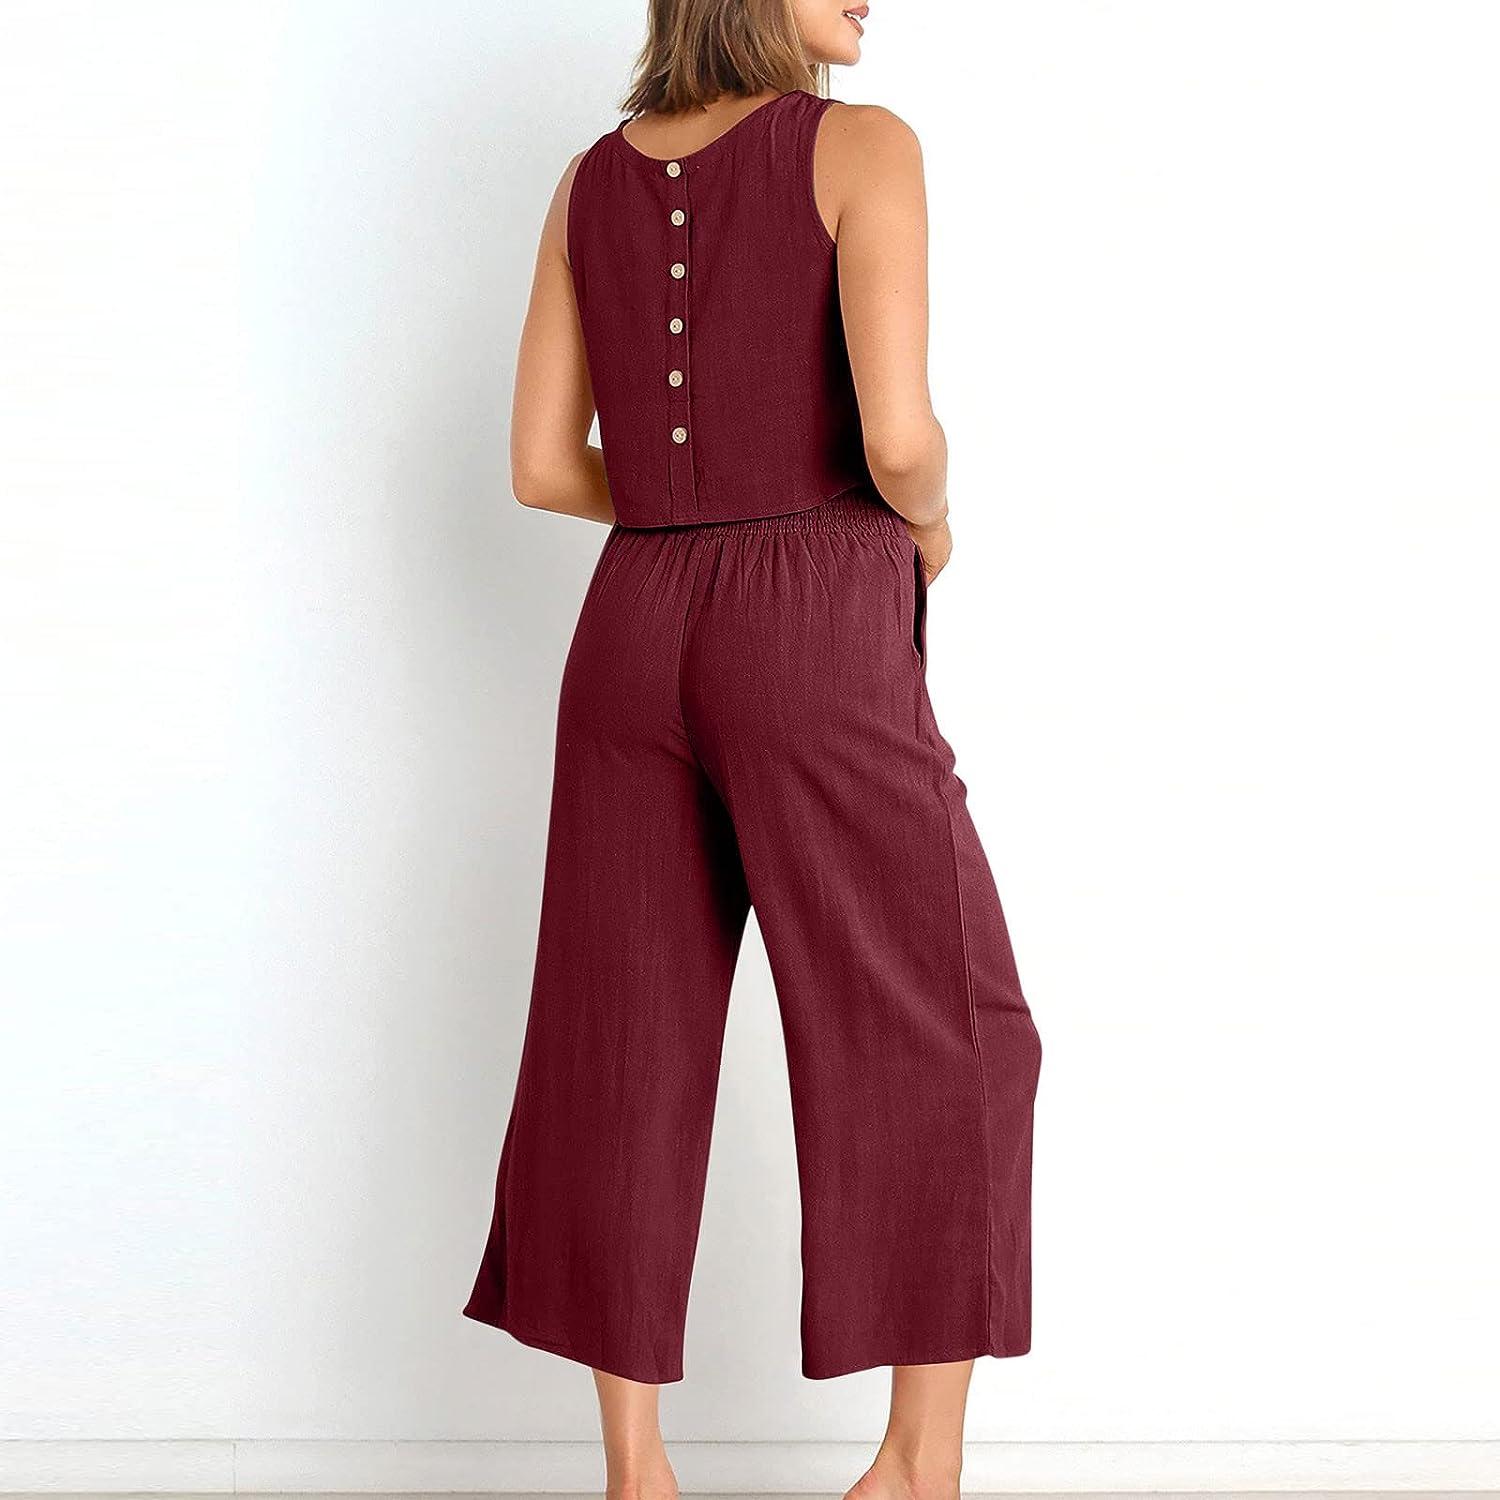 Buy Women Two Piece Outfit, Summer Co-ord Set With Tank Top, Linen